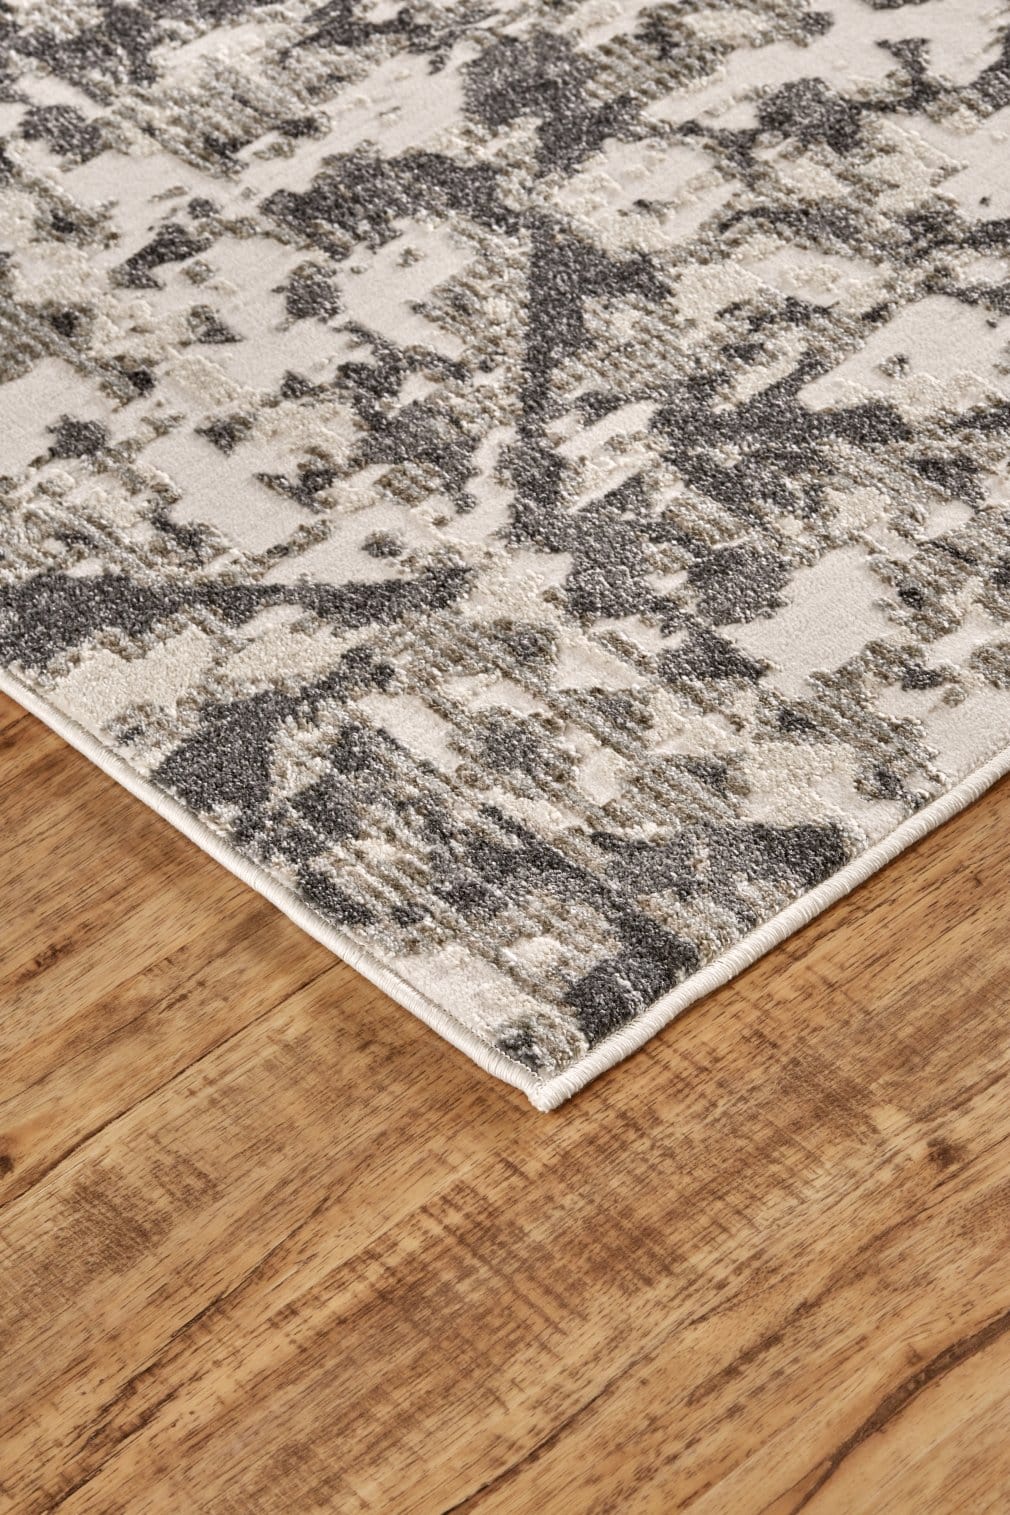 Feizy Kano Distressed Medallion Diamond Rug - Ivory & Gray - Available in 8 Sizes